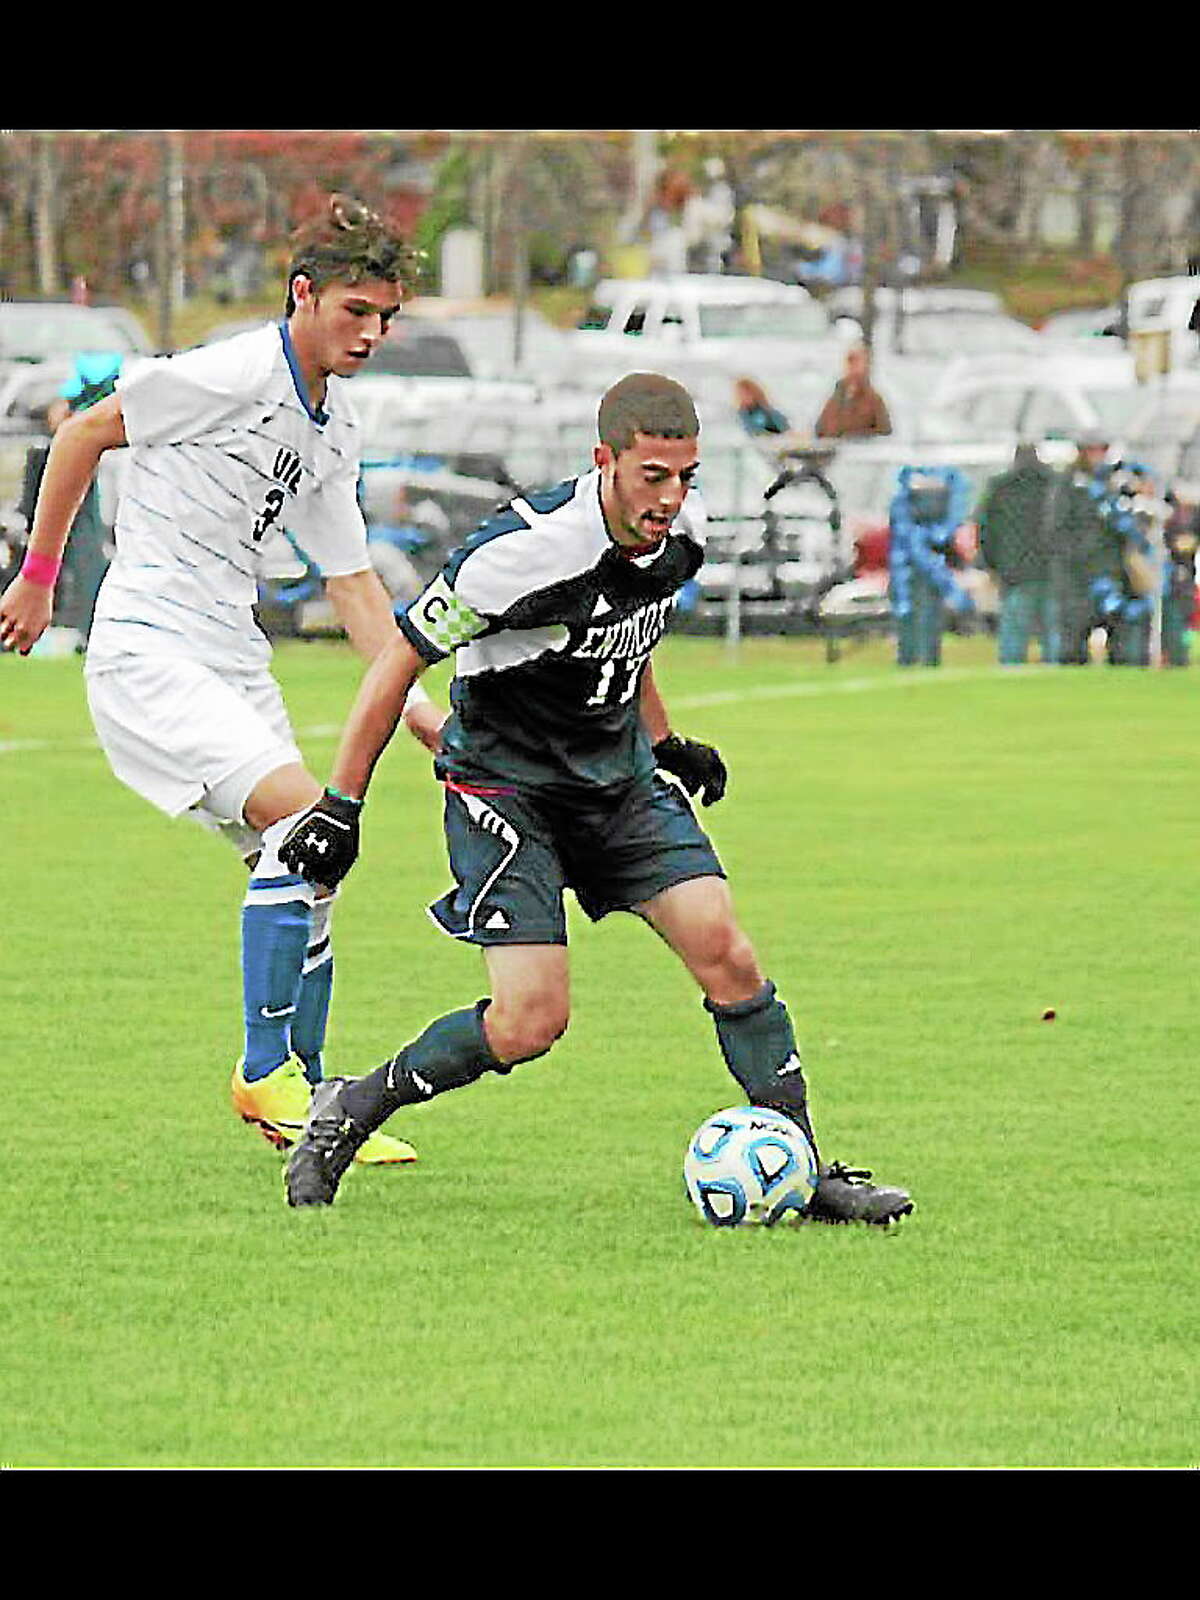 Former Torrington Red Raider and four-year Endicott College player Brett Longobucco made a name for himself as a versatile defender and finished his senior season as a captain,.